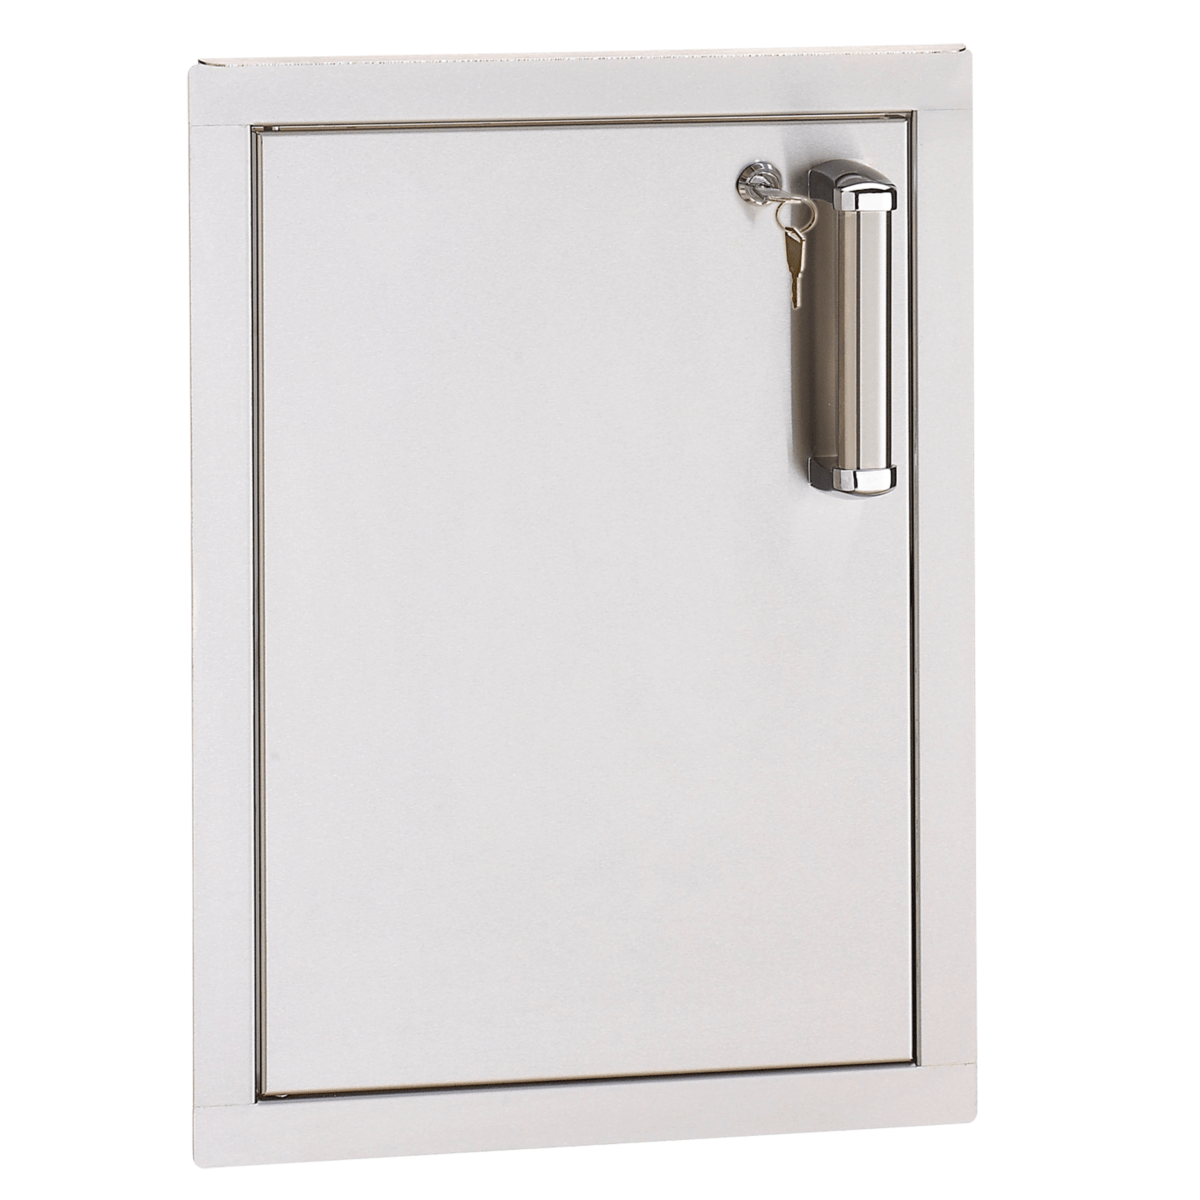 Fire Magic Flush Single Vertical Access Door with Lock - Kitchen King Direct